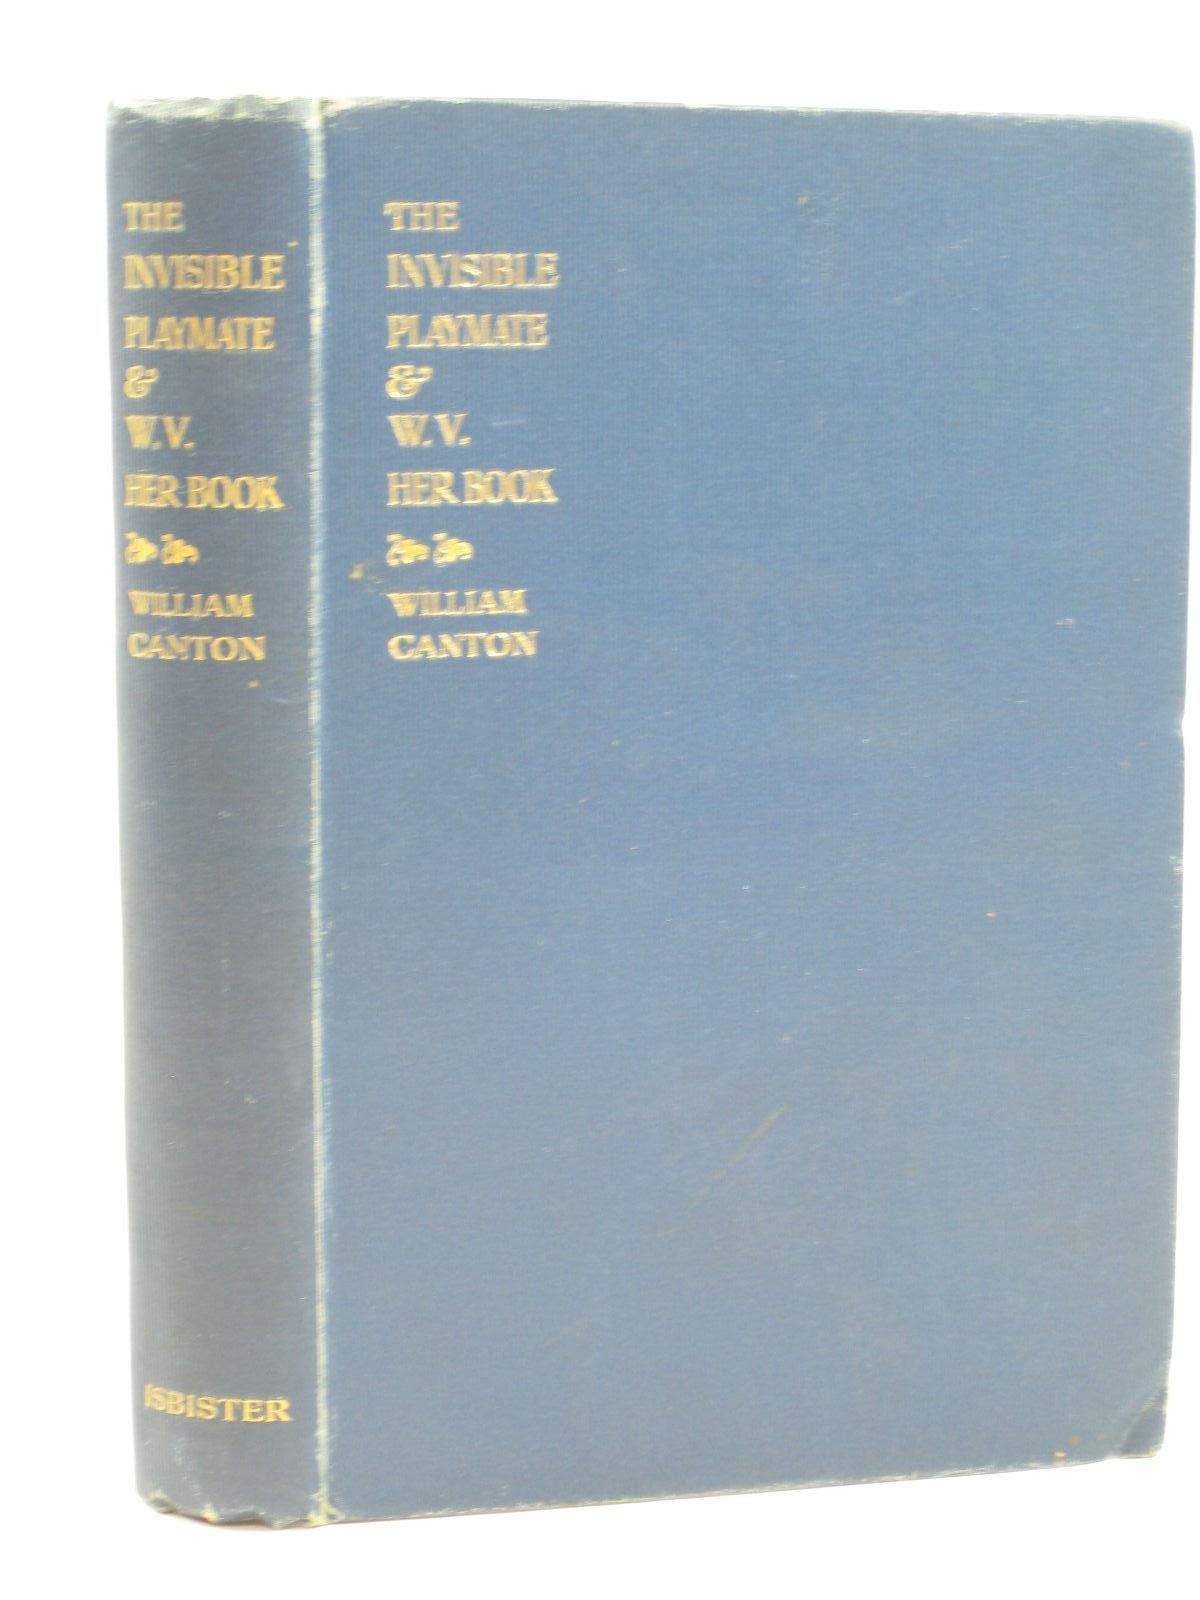 Photo of THE INVISIBLE PLAYMATE & W. V. HER BOOK written by Canton, William illustrated by Brock, C.E. published by Isbister &amp; Co. Ltd. (STOCK CODE: 1406378)  for sale by Stella & Rose's Books